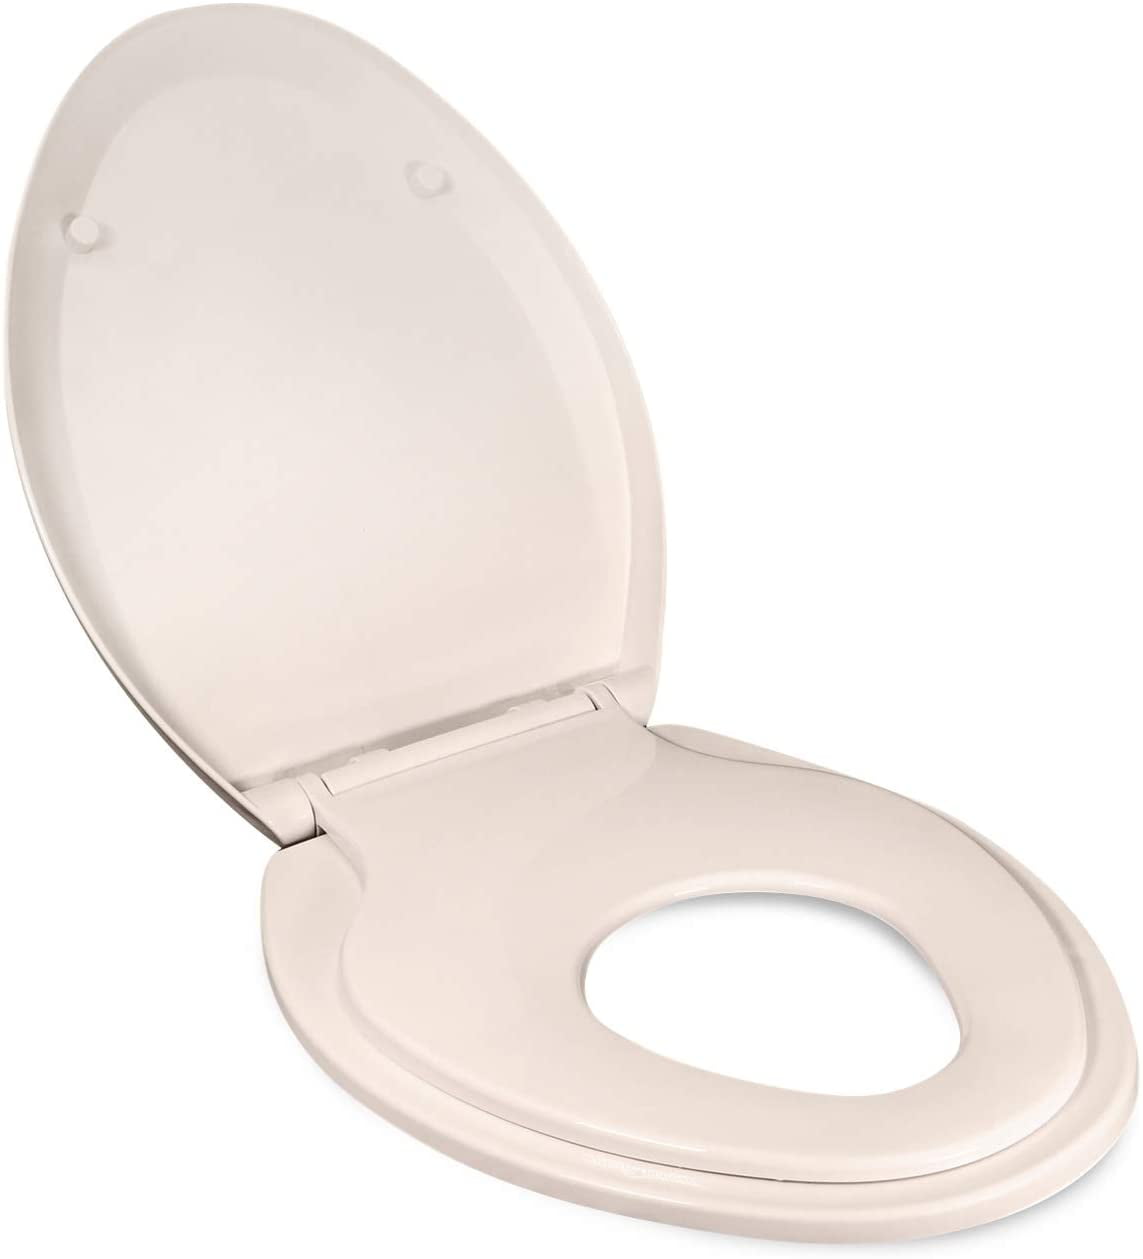 Details about   V-Shape Elongated Toilet Seat for Adult & Kids With Built-in Potty Training Seat 